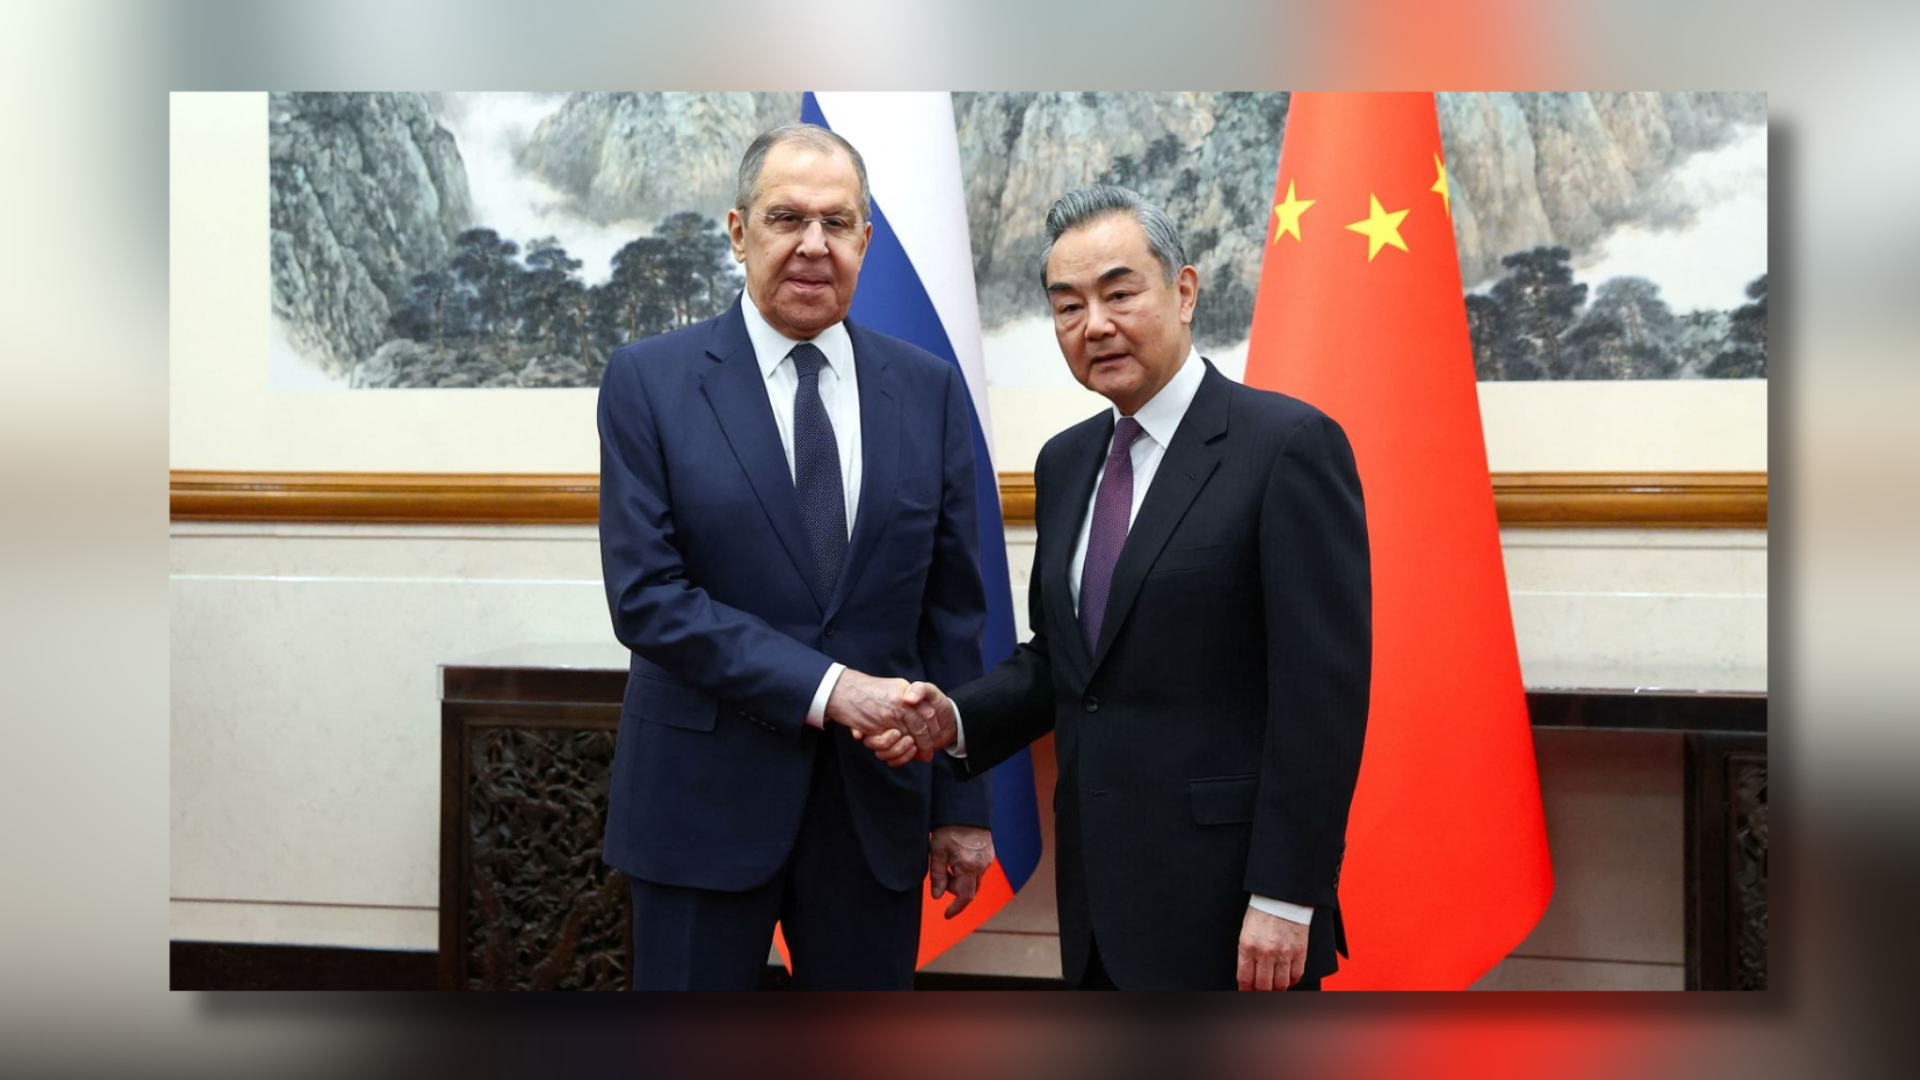 Xi Jinping Holds Talks With Russian Foreign Minister Sergey Lavrov In Beijing